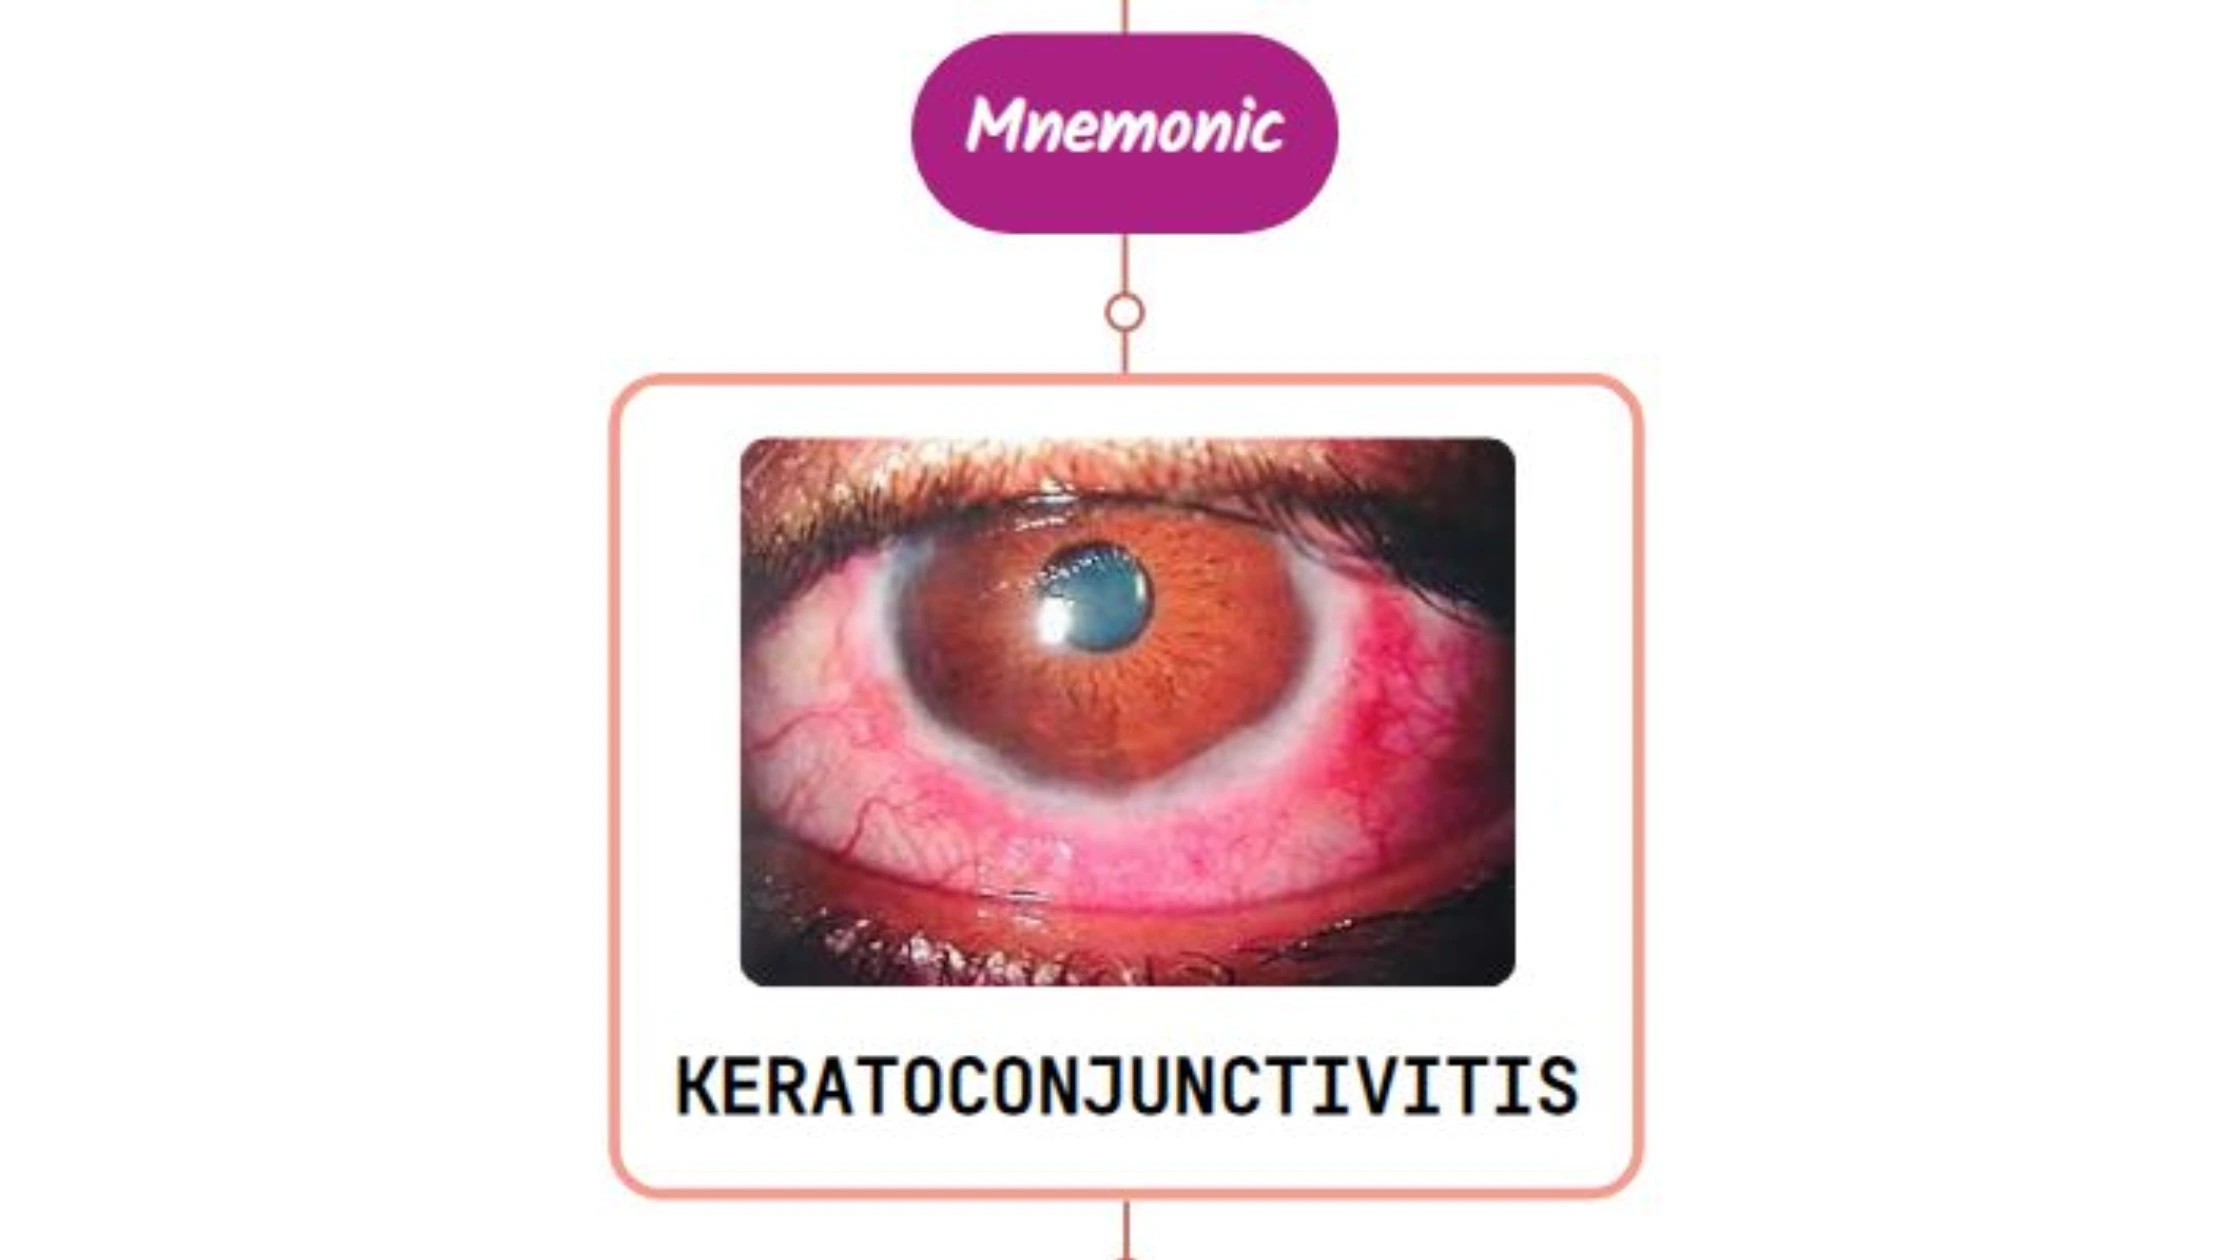 You are currently viewing Keratoconjunctivitis Sicca Mnemonic